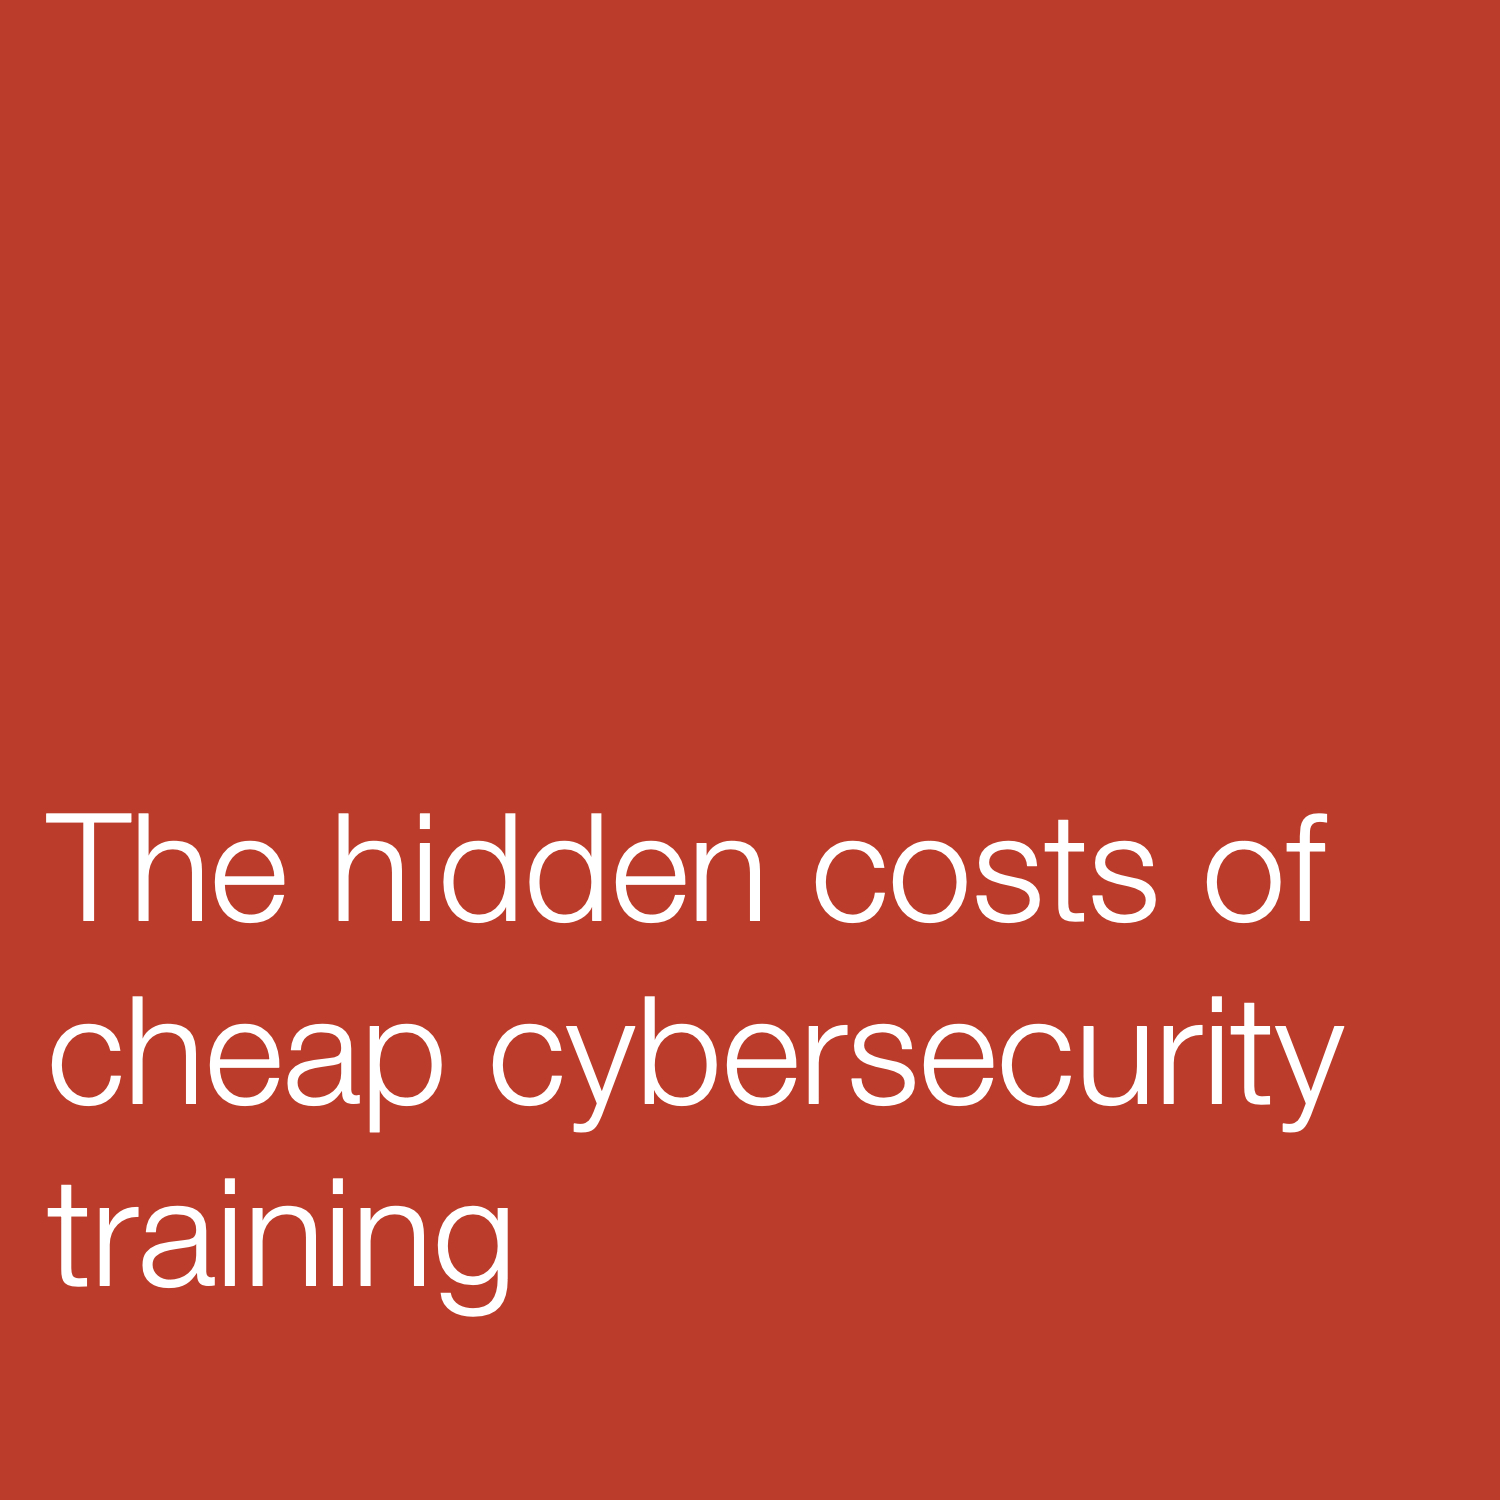 The hidden costs of cheap cybersecurity training